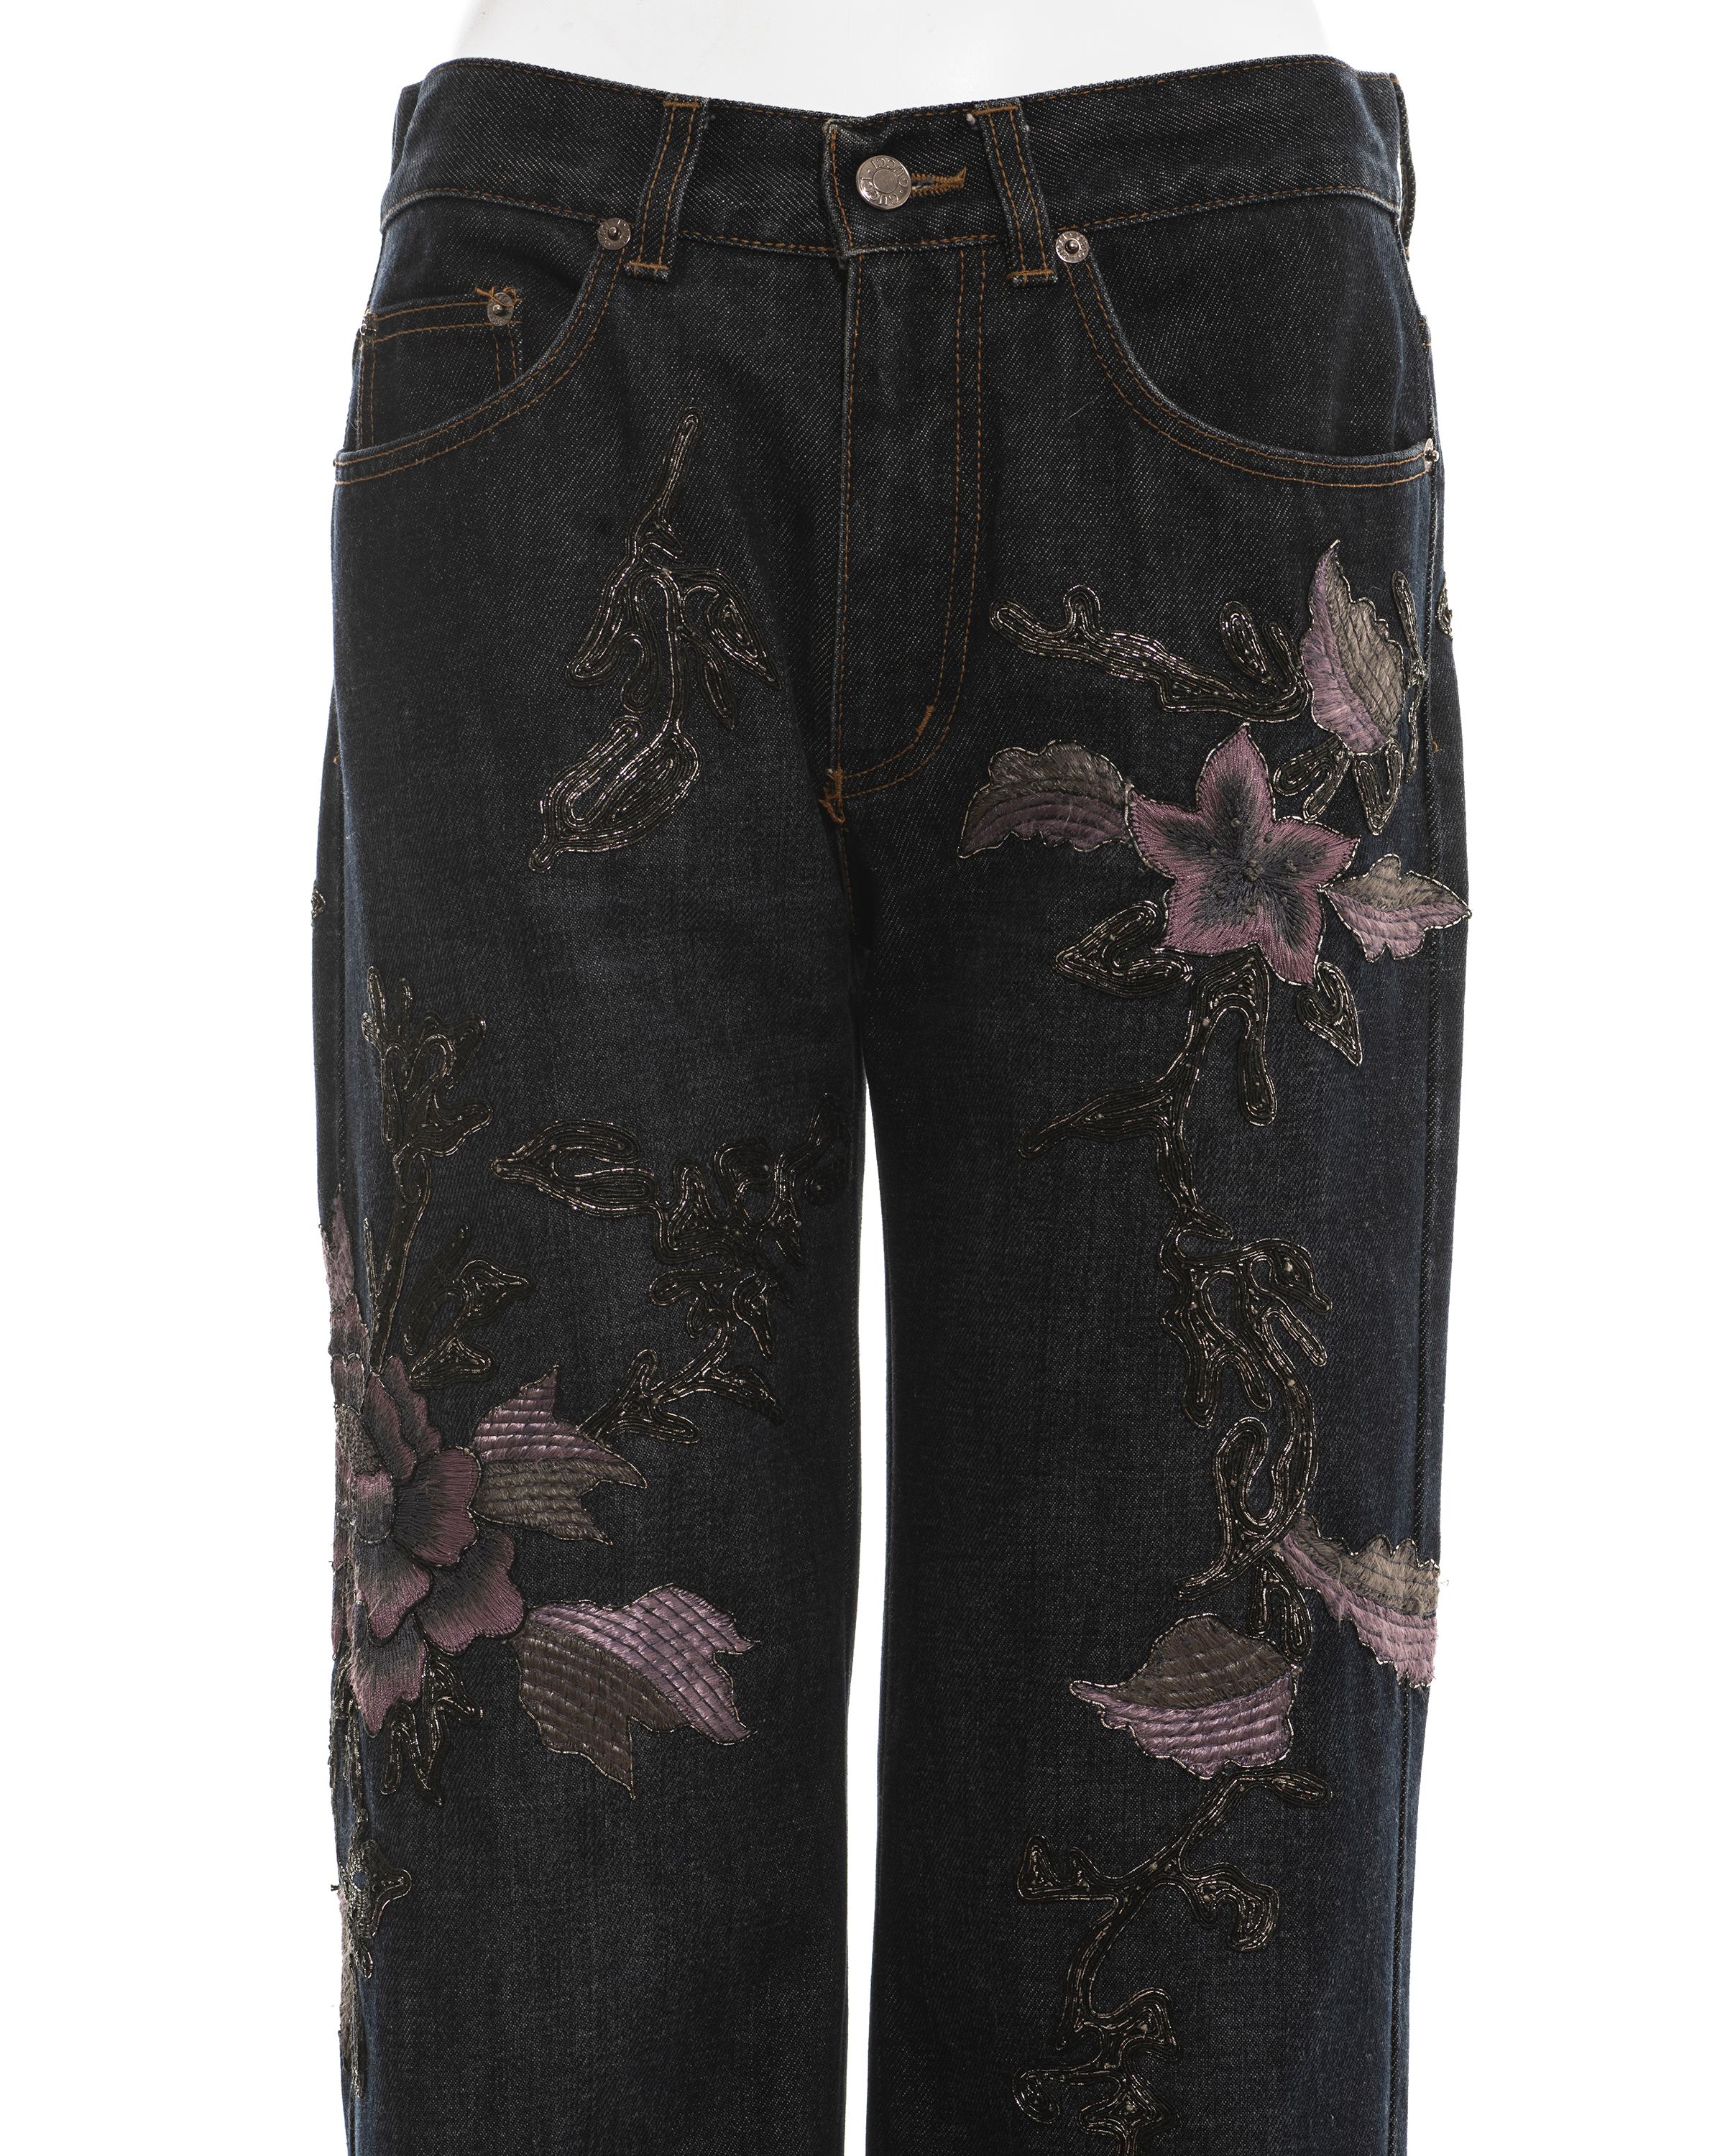 Gucci Floral Jeans - 4 For Sale on 1stDibs | gucci floral jeans mens, gucci  floral painted jeans, floral jeans mens